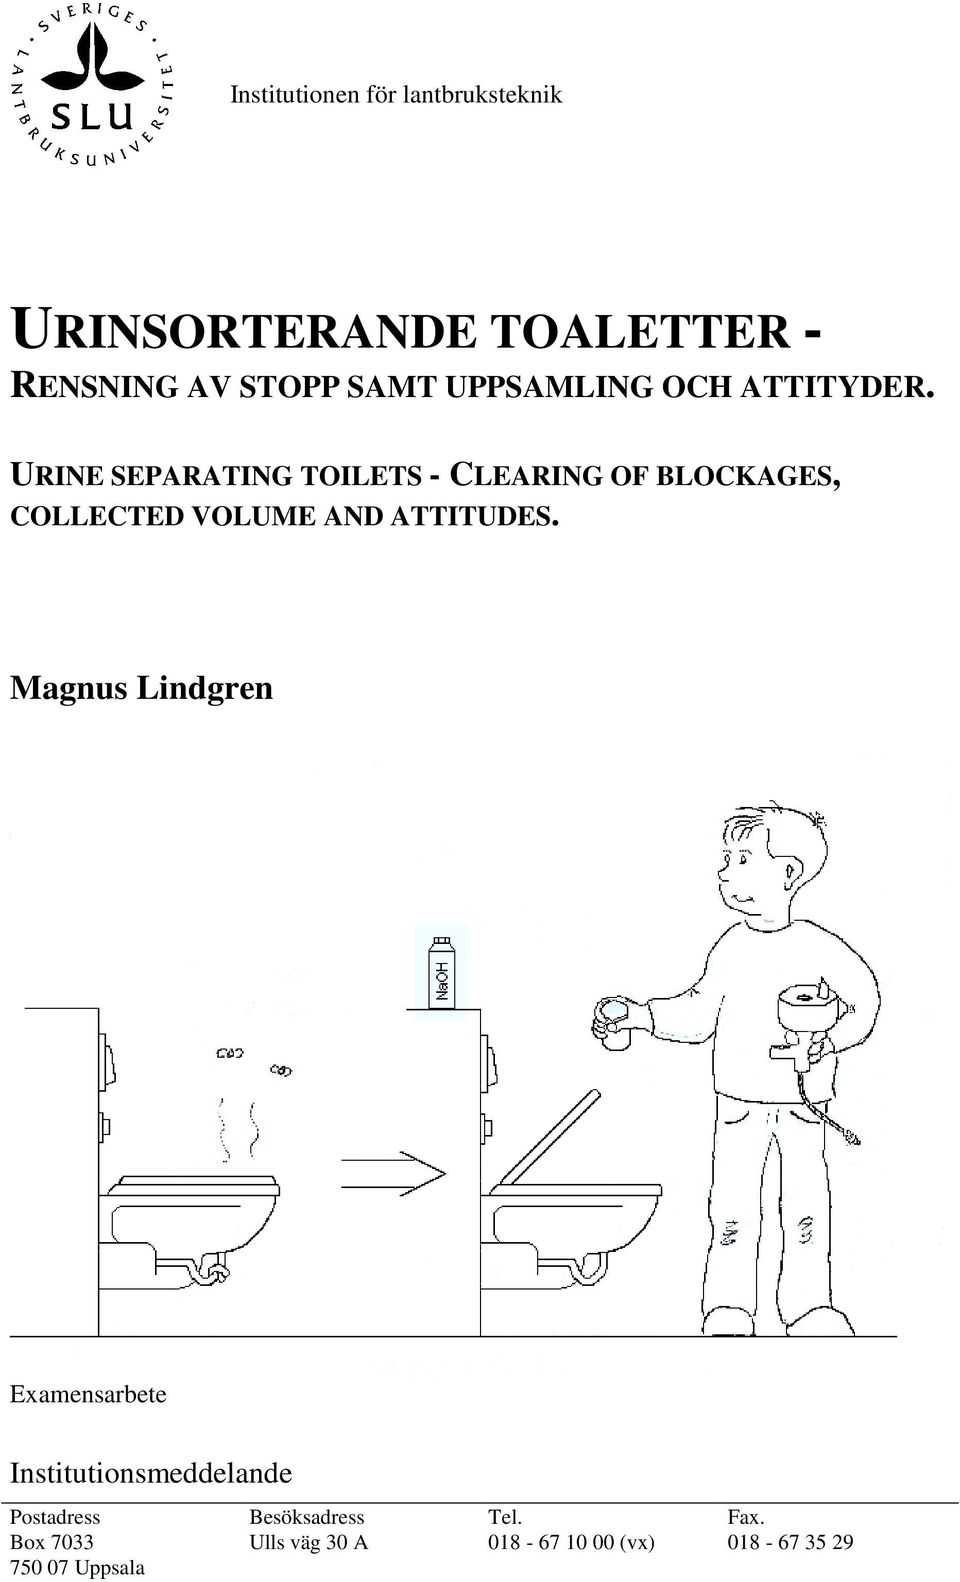 URINE SEPARATING TOILETS - CLEARING OF BLOCKAGES, COLLECTED VOLUME AND ATTITUDES.